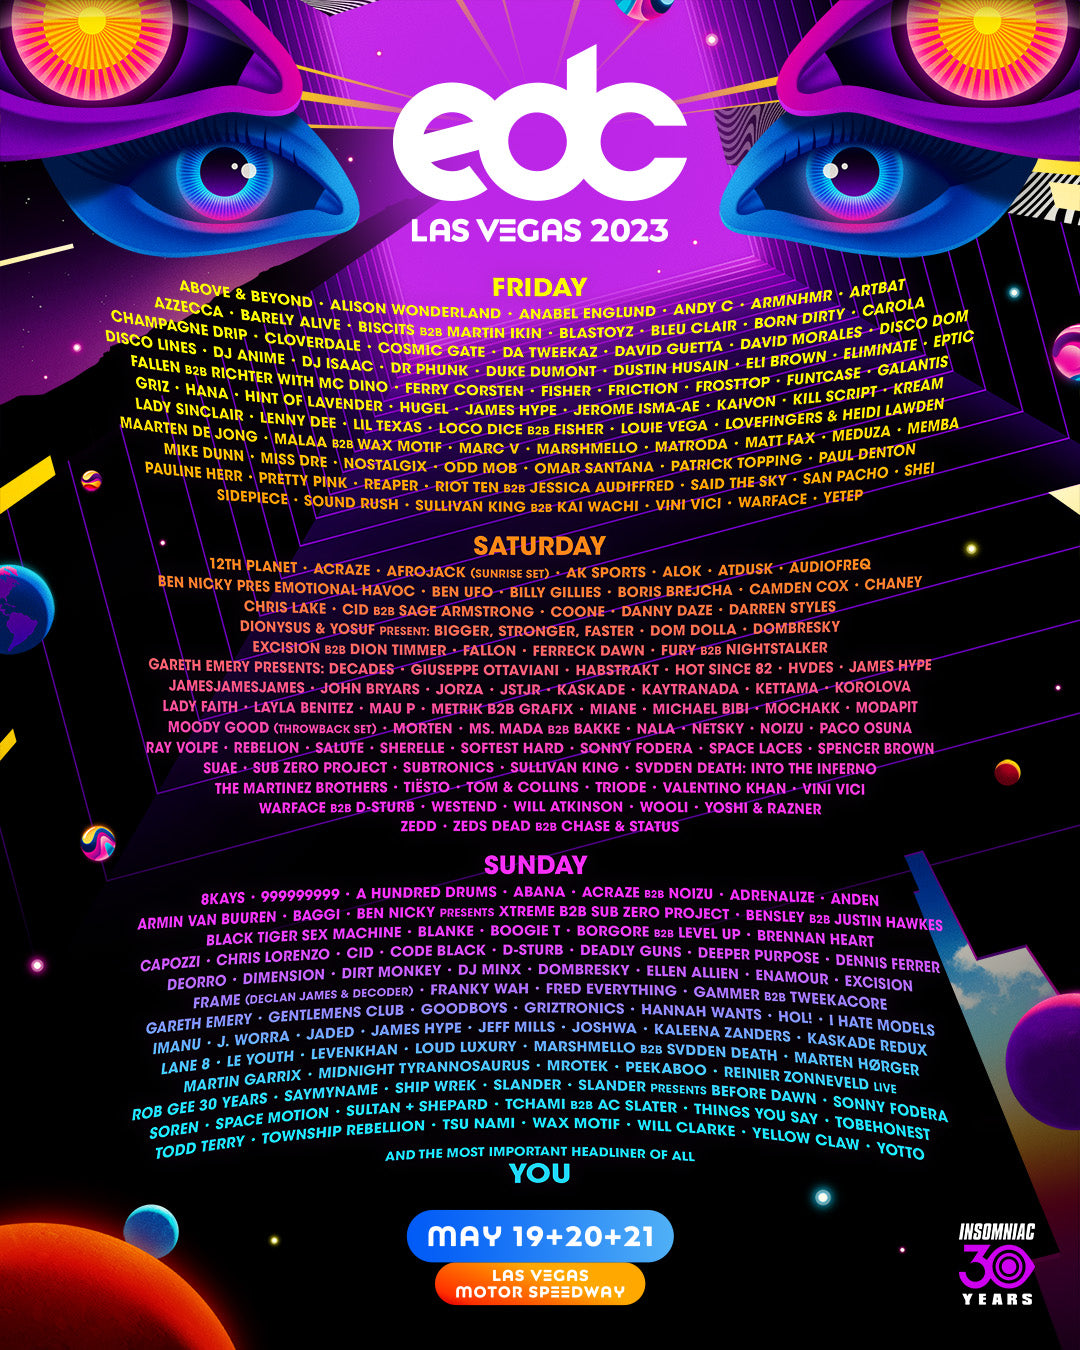 EDC Las Vegas 2023 Reveals Stacked Lineup for Insomniac's 30 Year